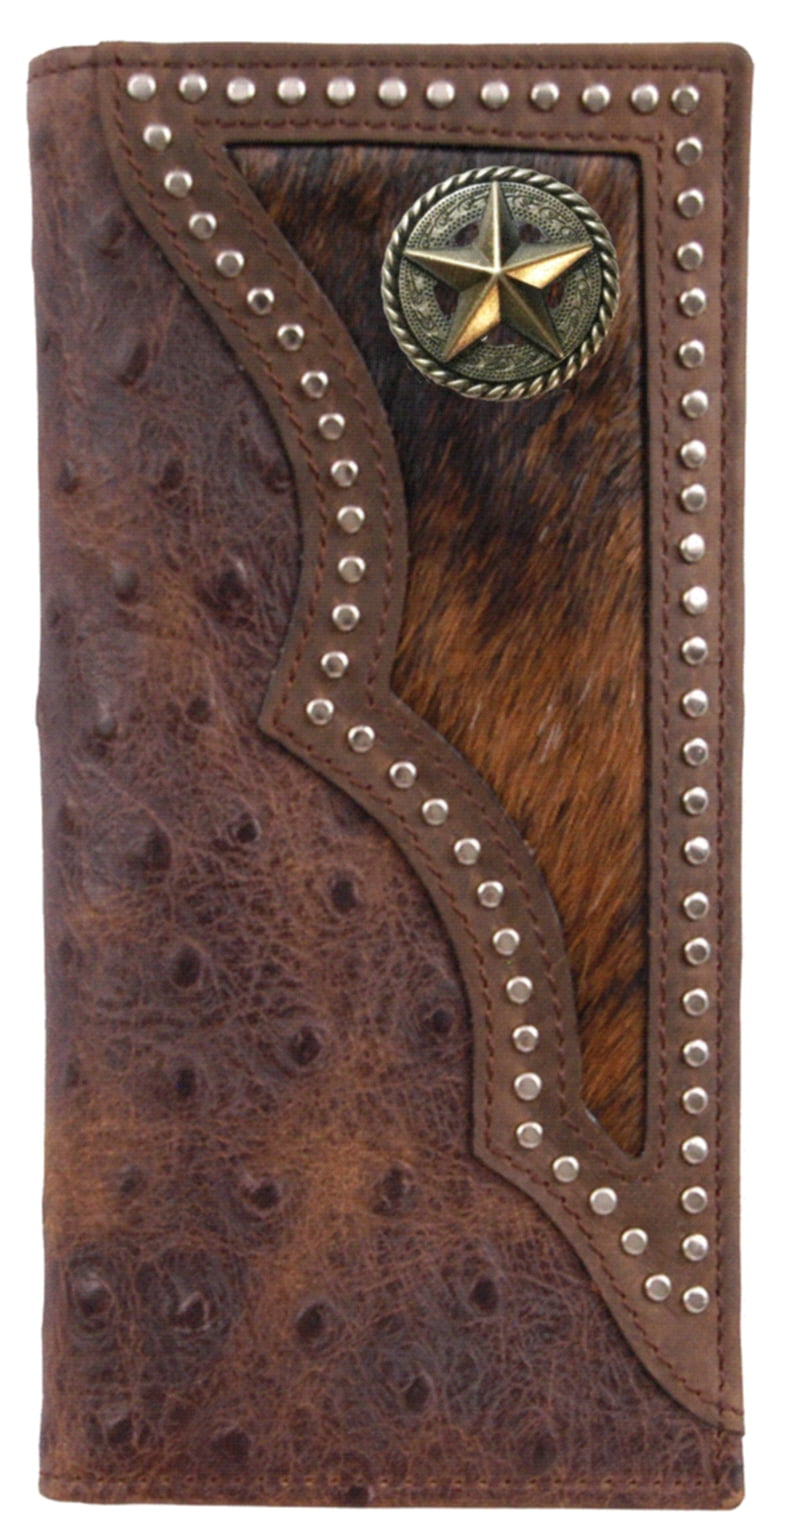 Men's Genuine Leather Bifold Wallet Embossed Ostrich Print Cowboy Western Style 